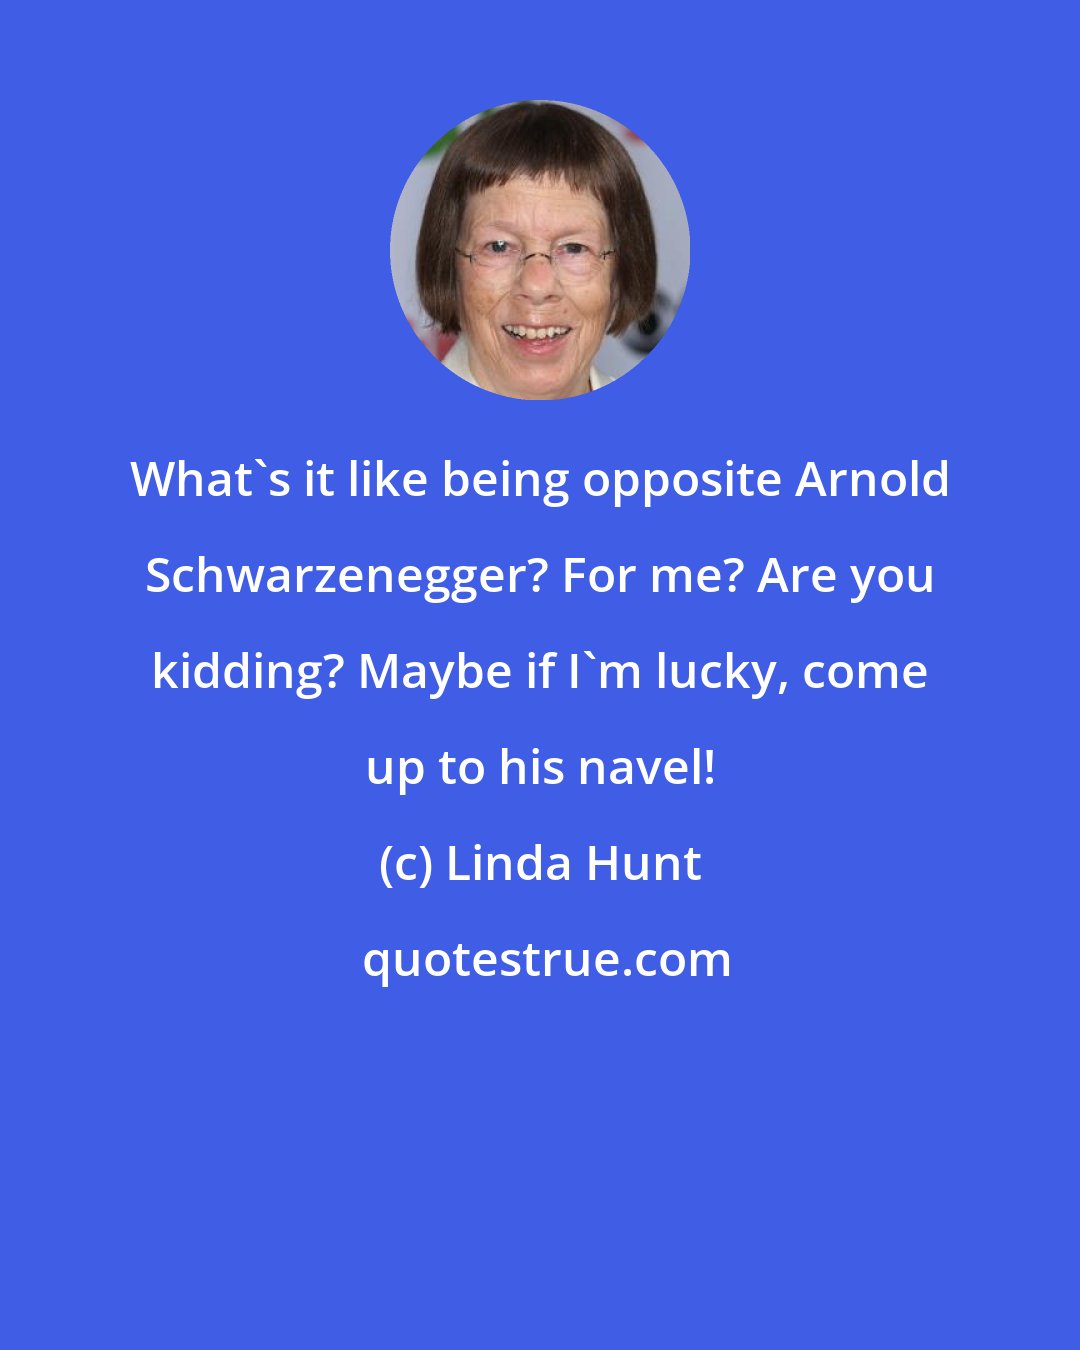 Linda Hunt: What's it like being opposite Arnold Schwarzenegger? For me? Are you kidding? Maybe if I'm lucky, come up to his navel!